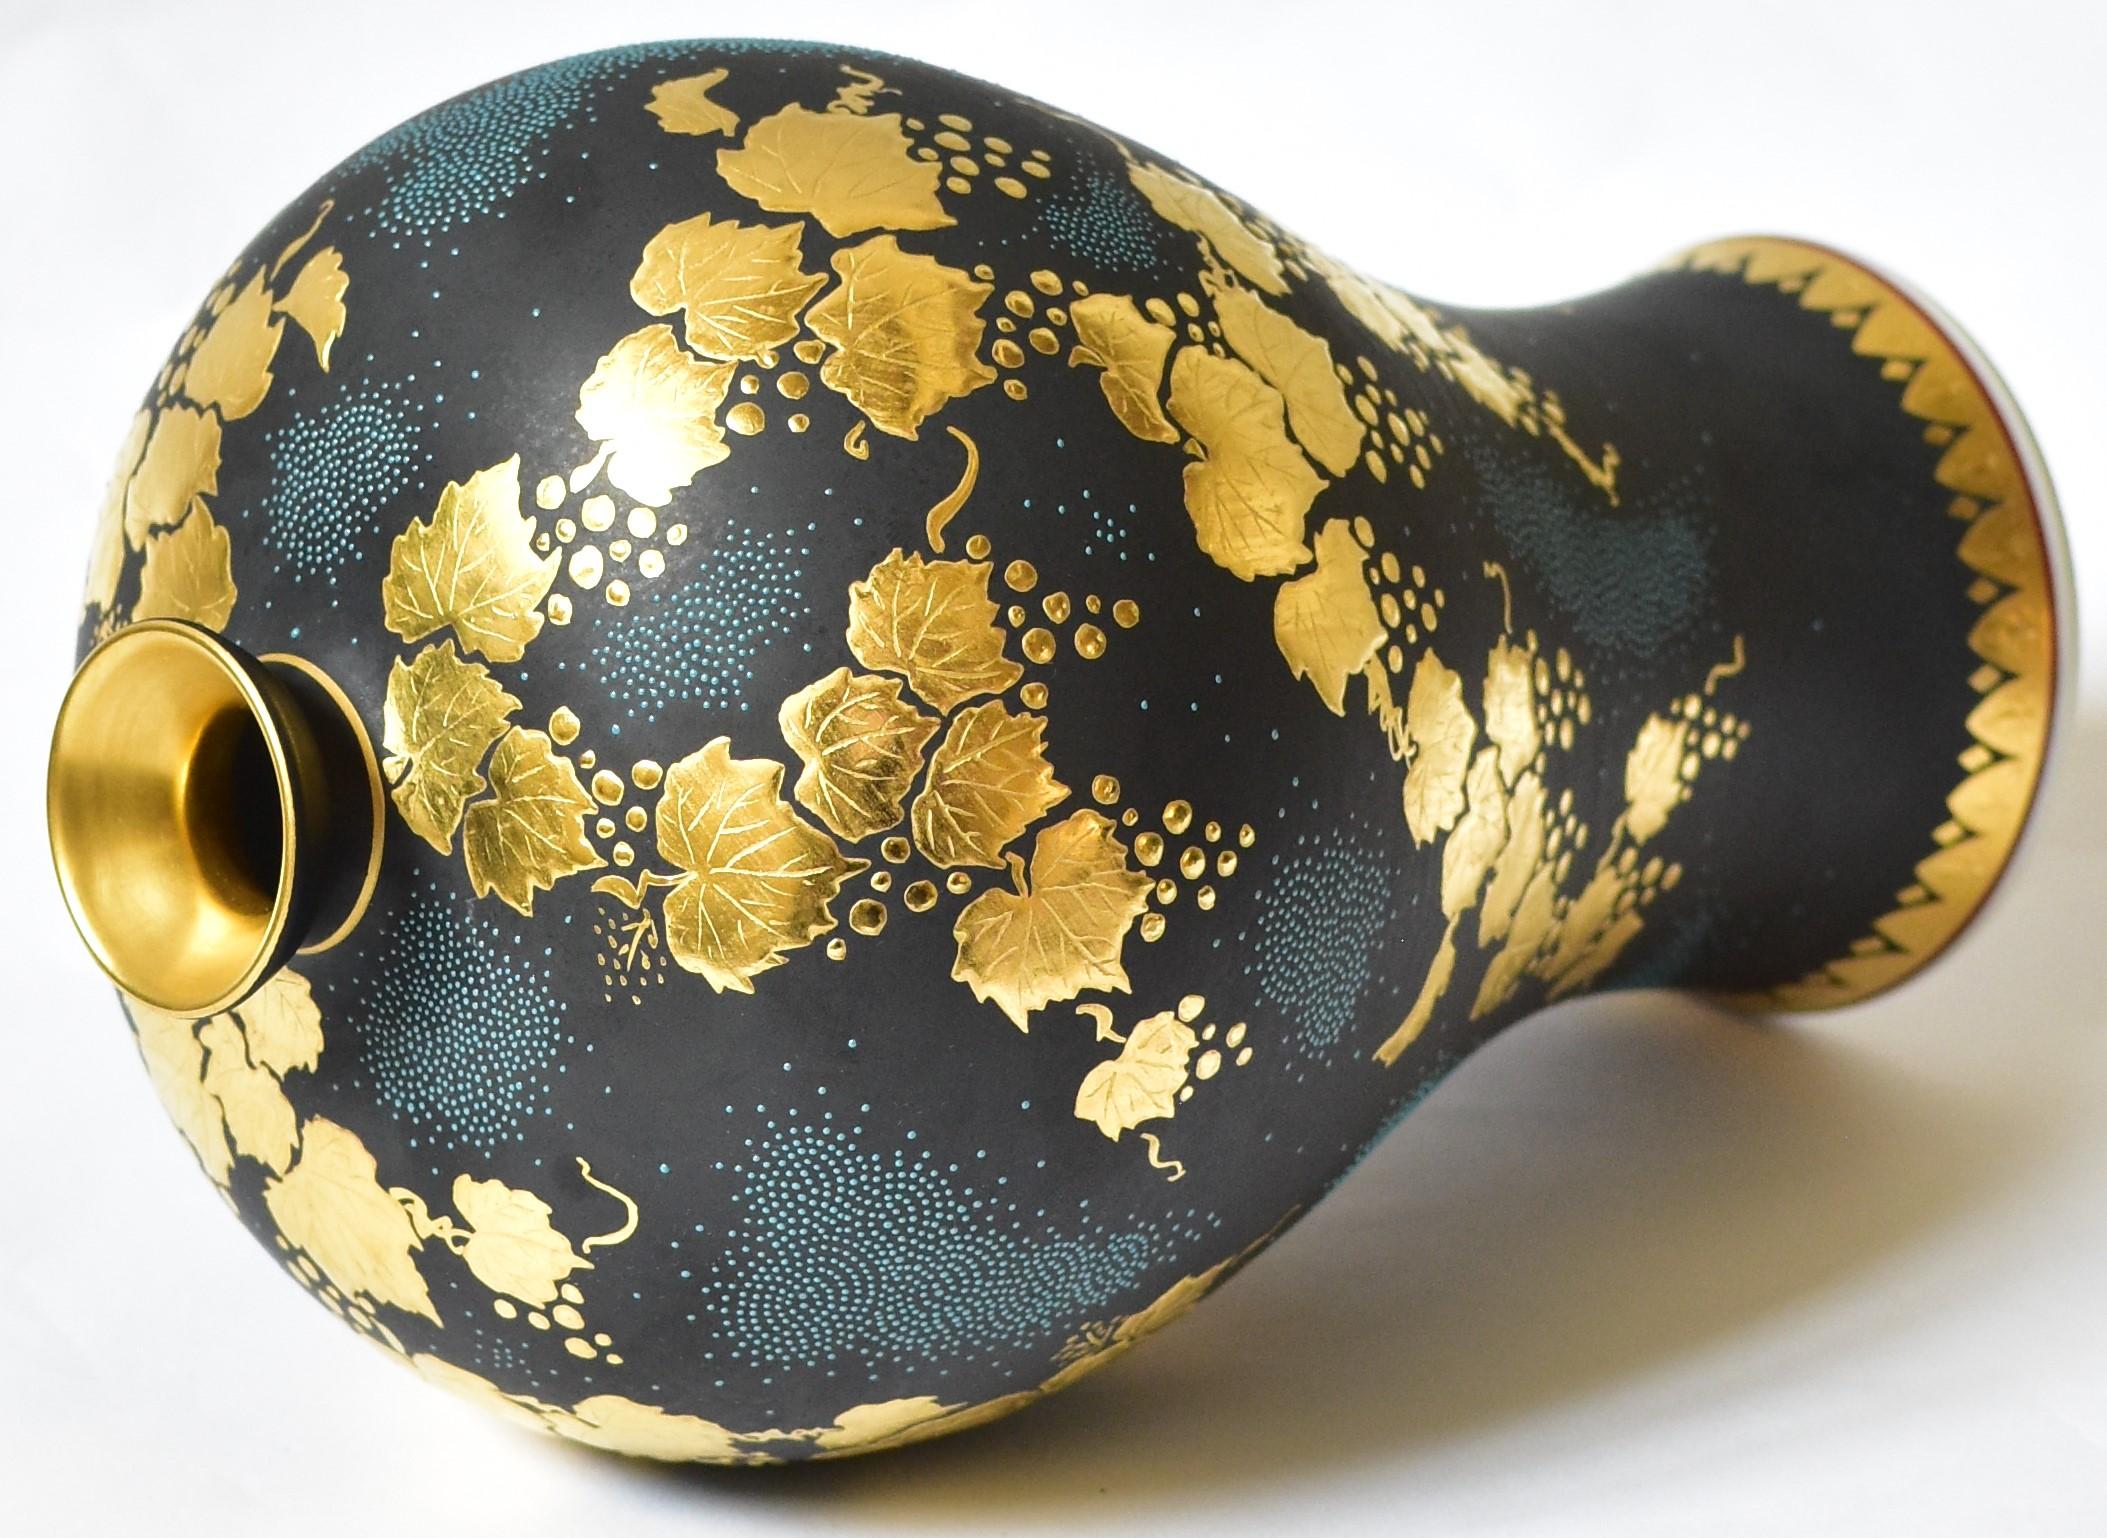 Extraordinary meuseum quality signed Japanese contemporary porcelain vase, referred to by the artist as the “lady with a golden shawl,” a masterpiece by a celebrated award-winning third-generation porcelain artist of the Kutani region of Japan